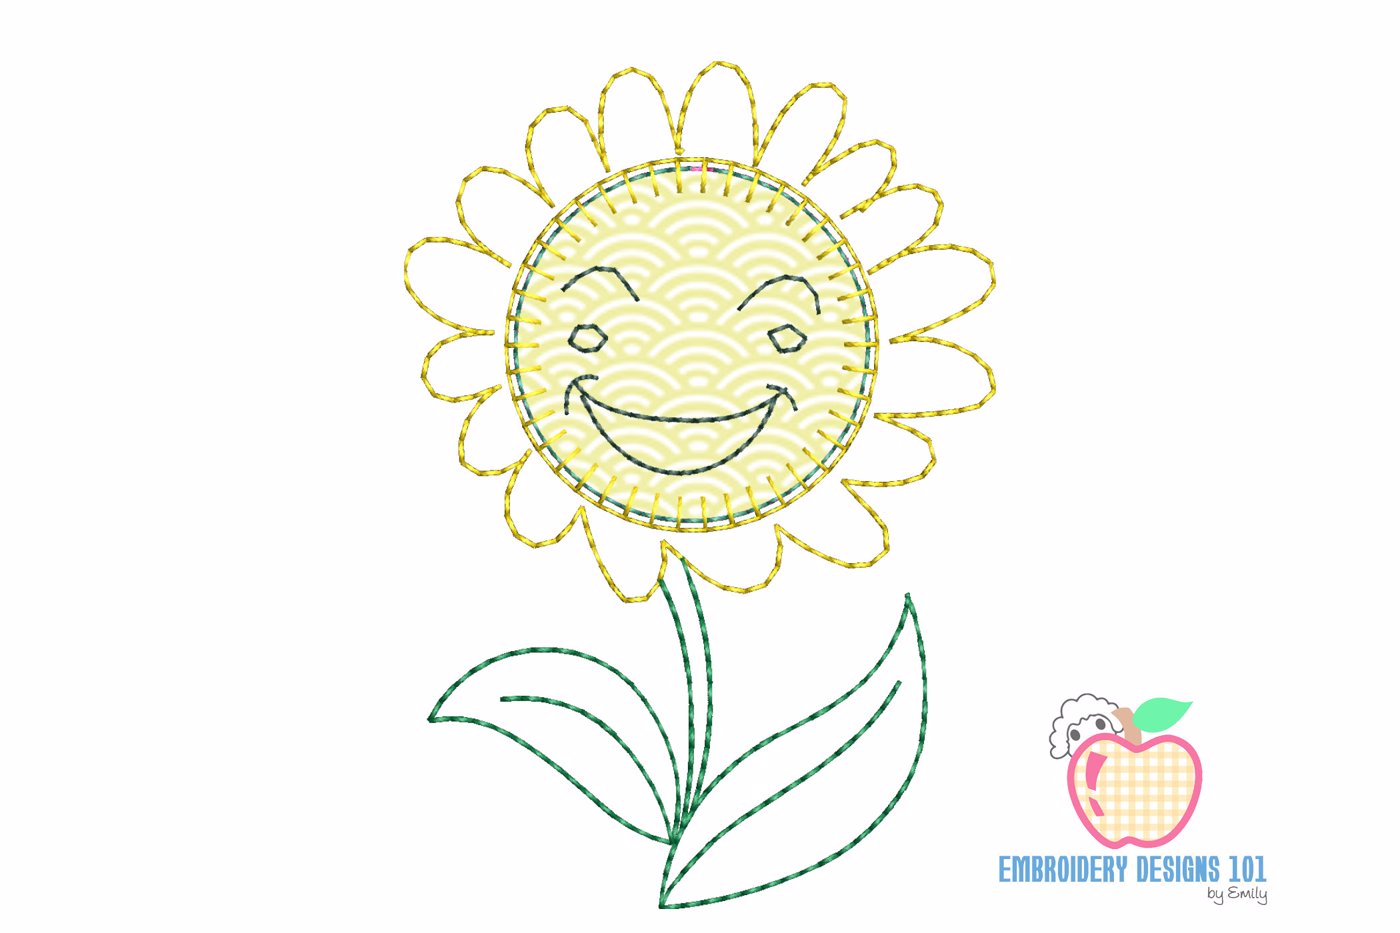 Smiling Face Of The Sunflower Embroidery Applique